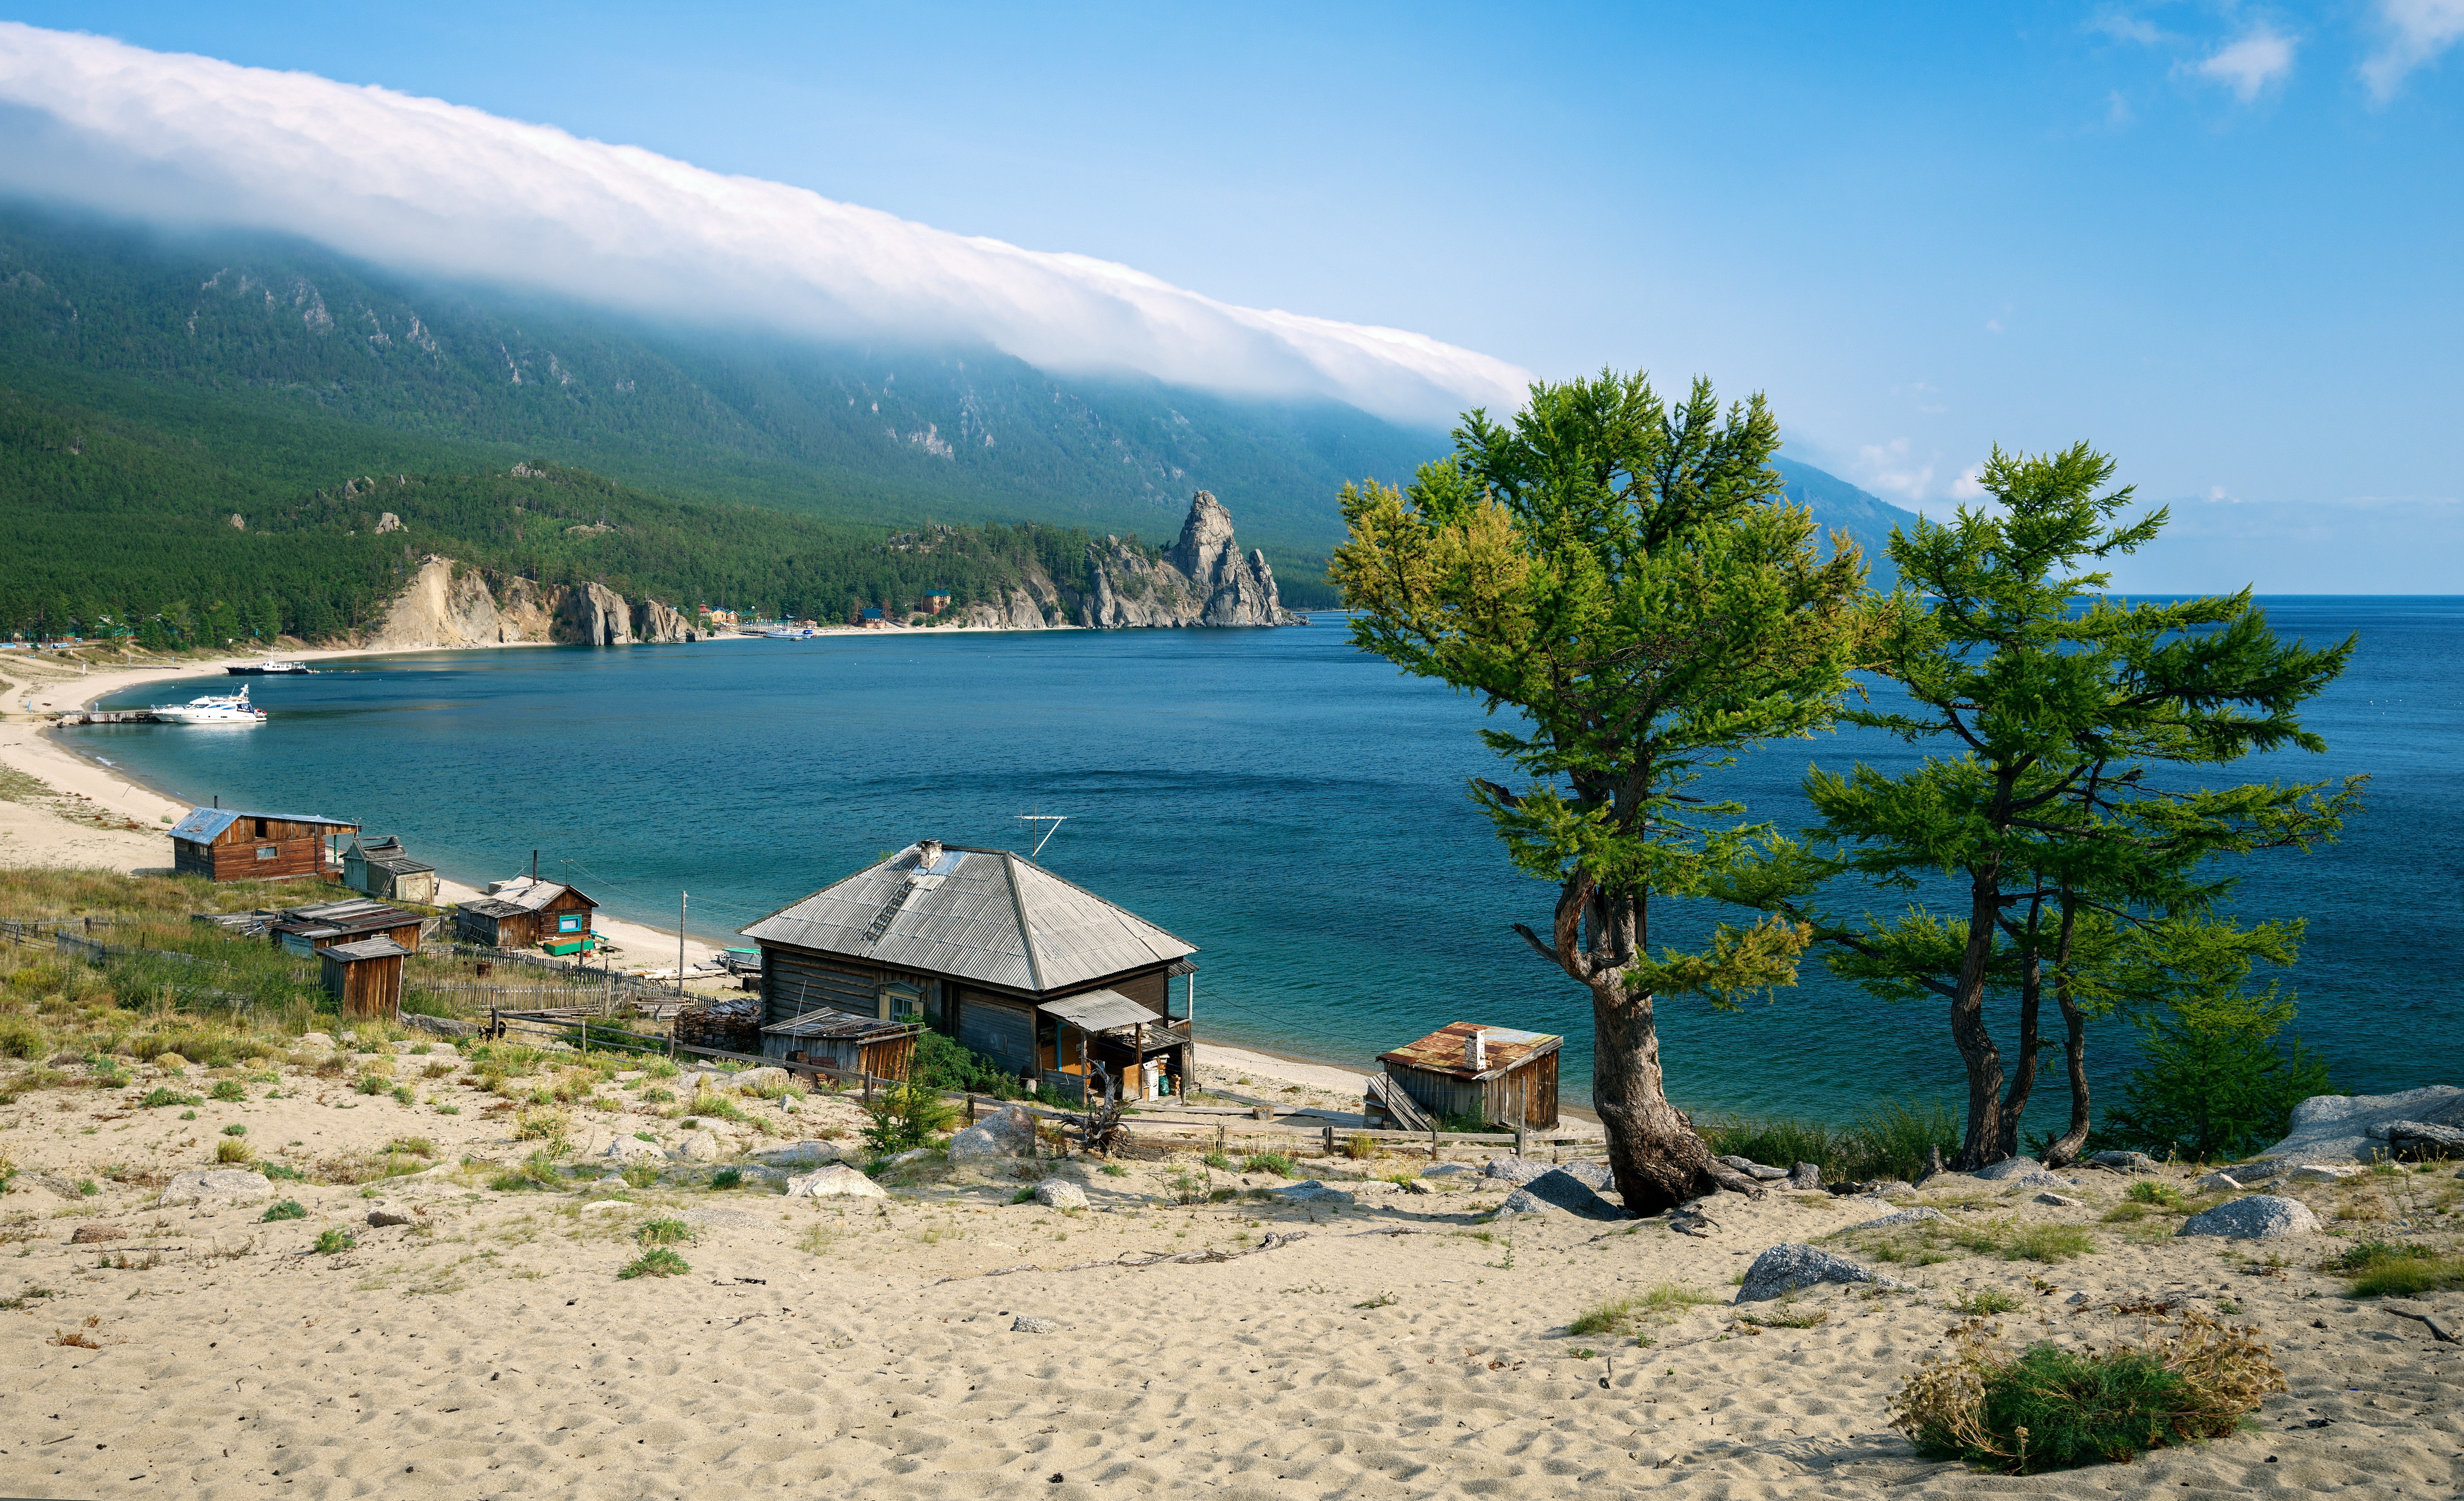 nature, Landscape, Water, Lake, Mountain, Trees, Clouds, Lake Baikal, Russia, House, Boat, Sand, Beach, Forest, Mist Wallpaper